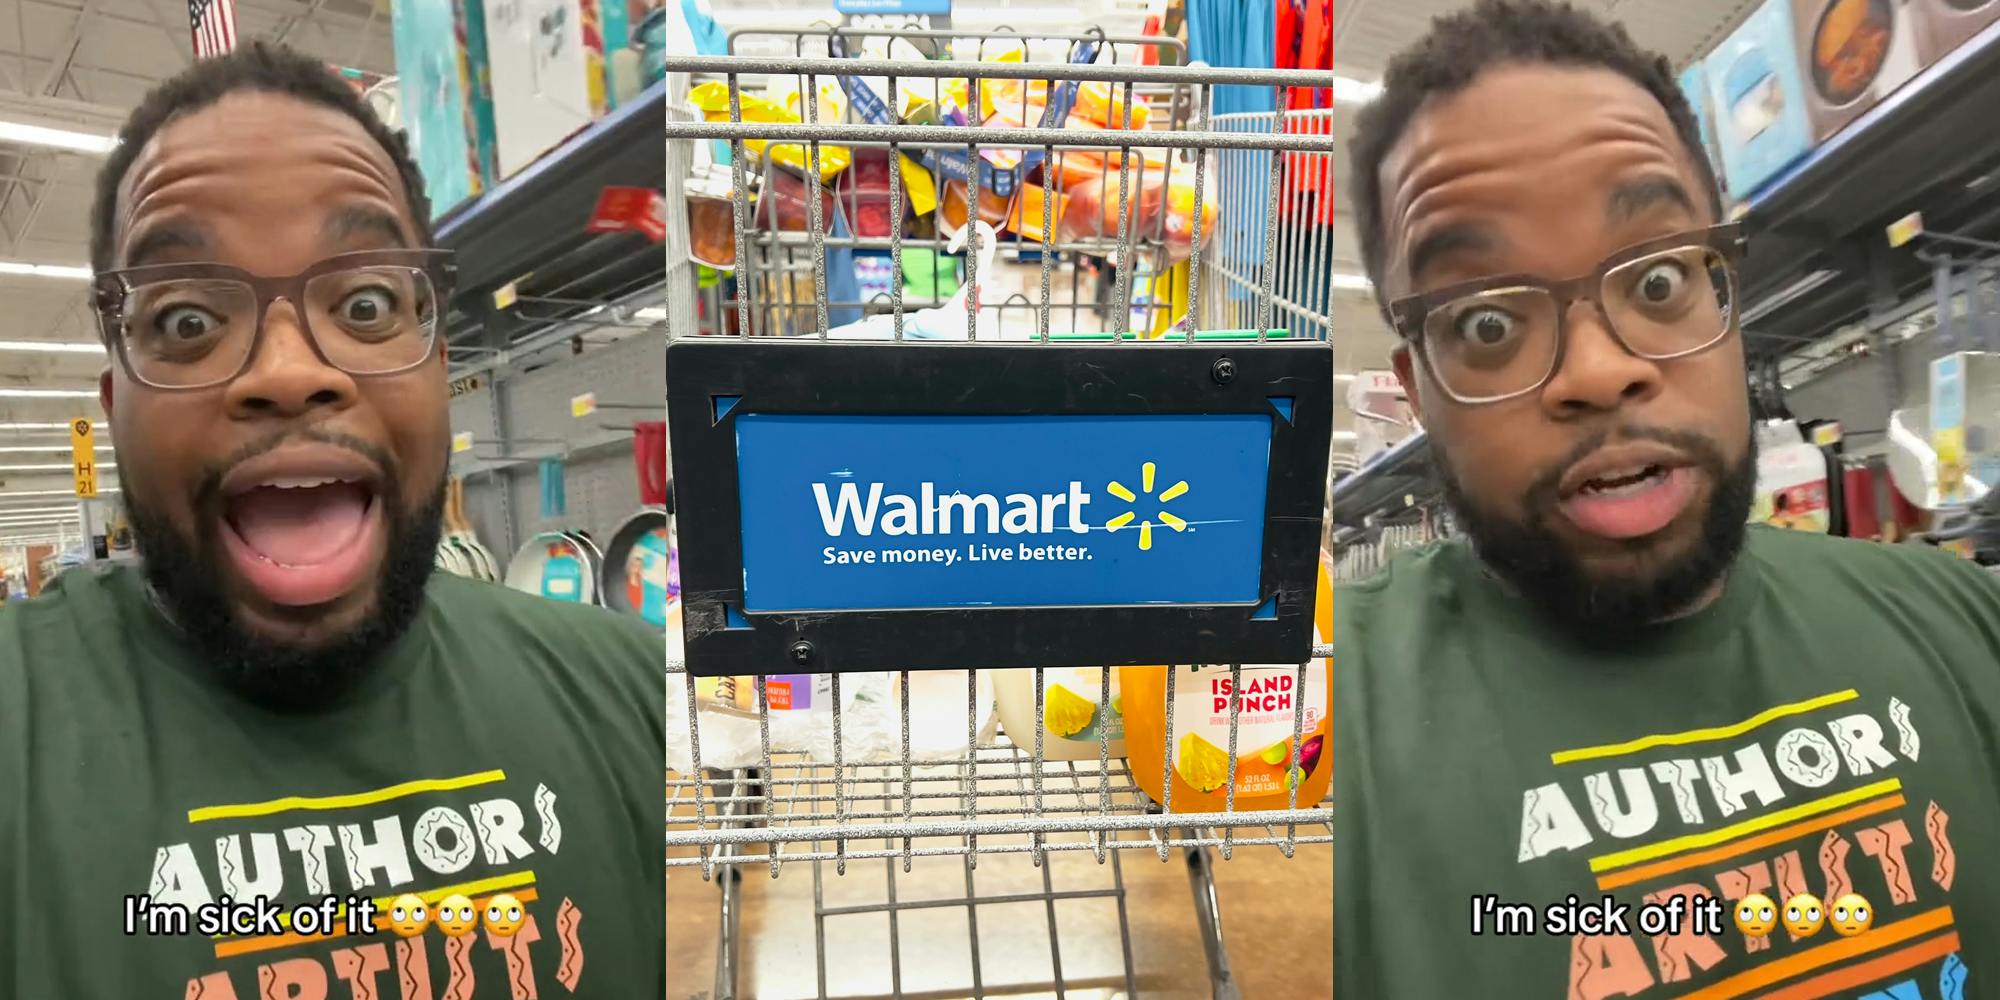 Walmart shopper speaking with caption "I'm sick of it" (l) Walmart cart in aisle with logo (c) Walmart shopper speaking with caption "I'm sick of it" (r)